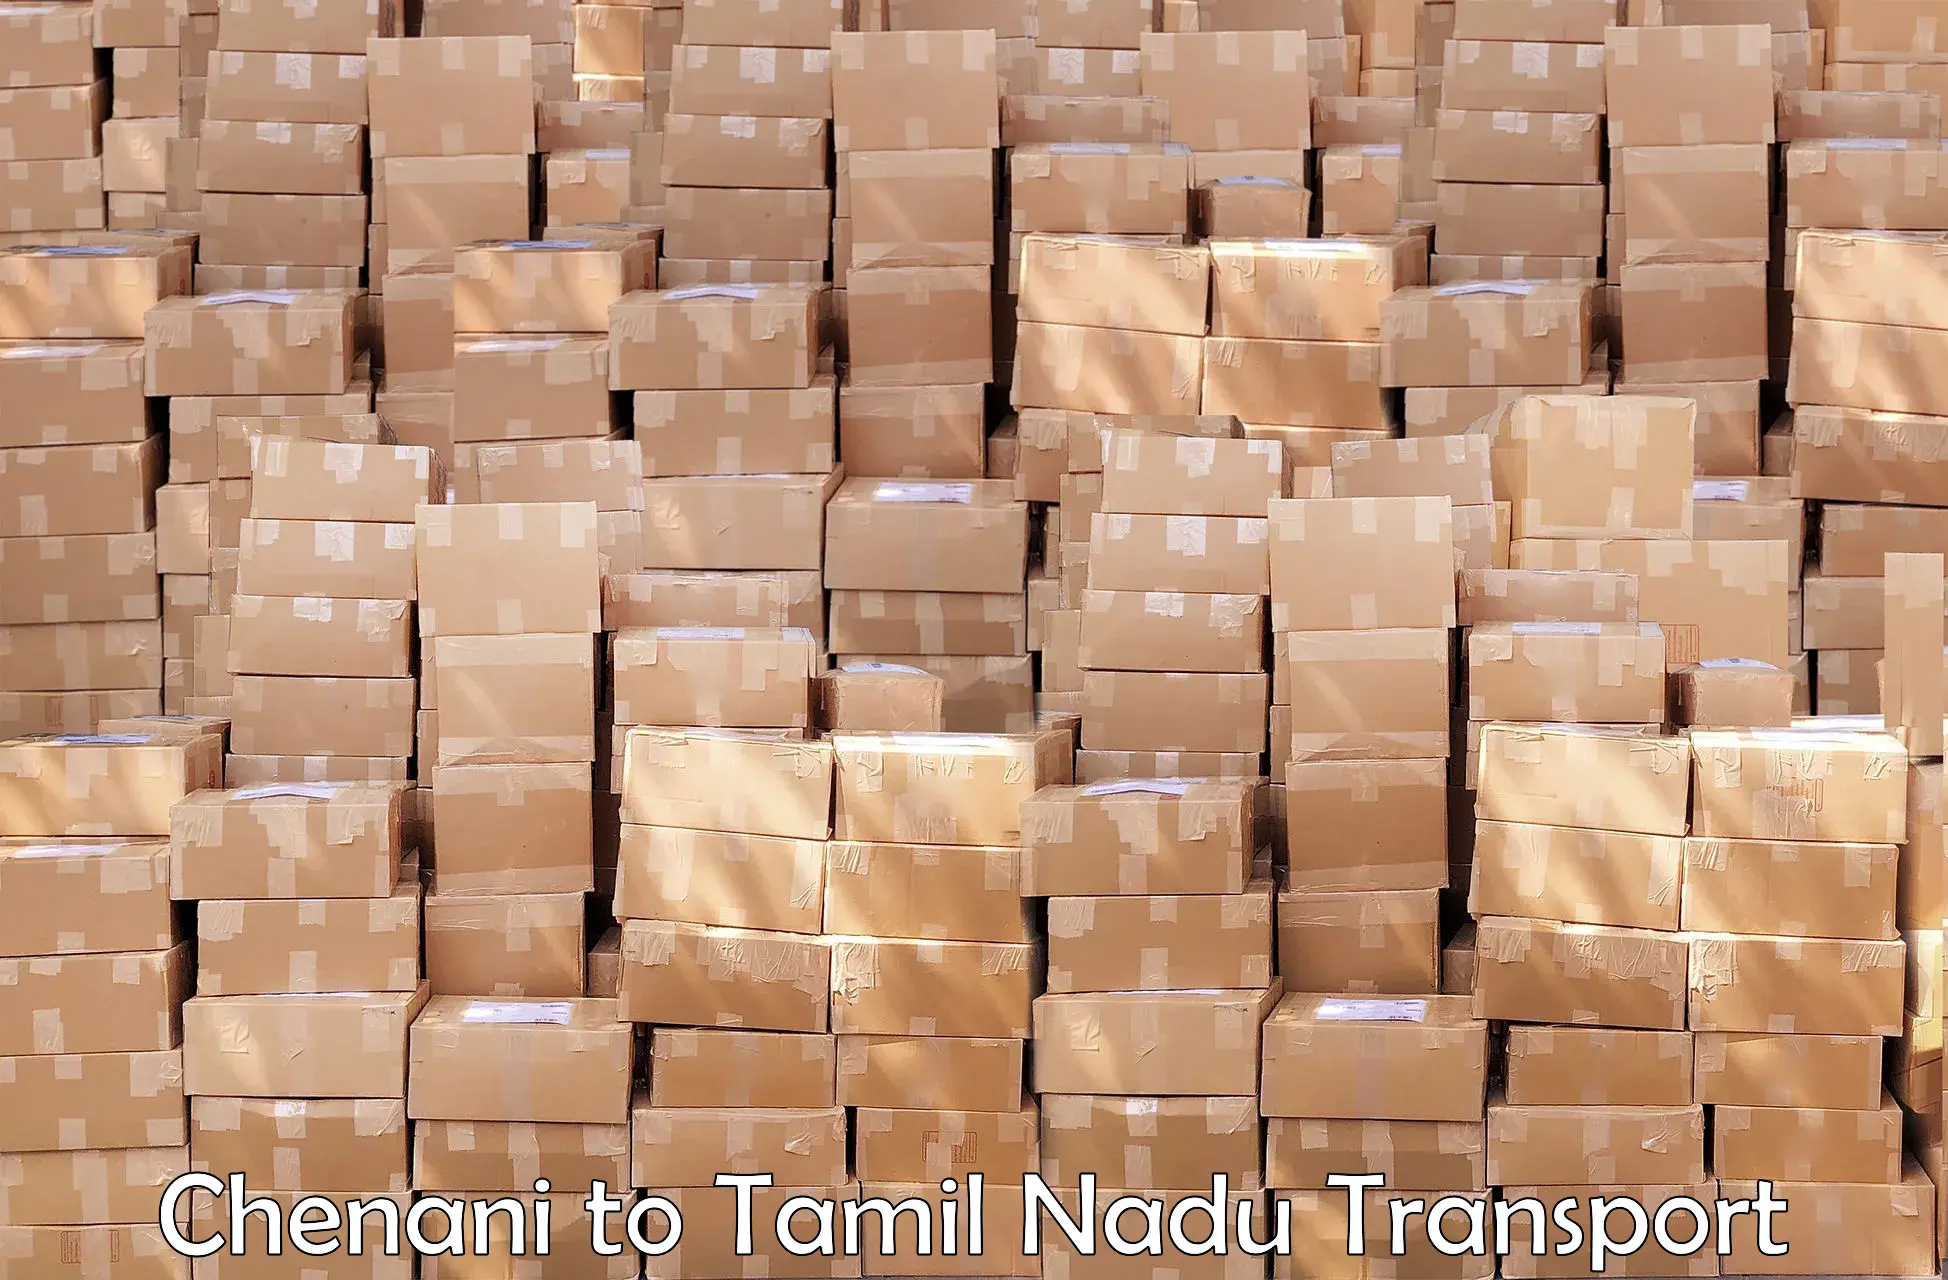 Container transport service Chenani to Ennore Port Chennai